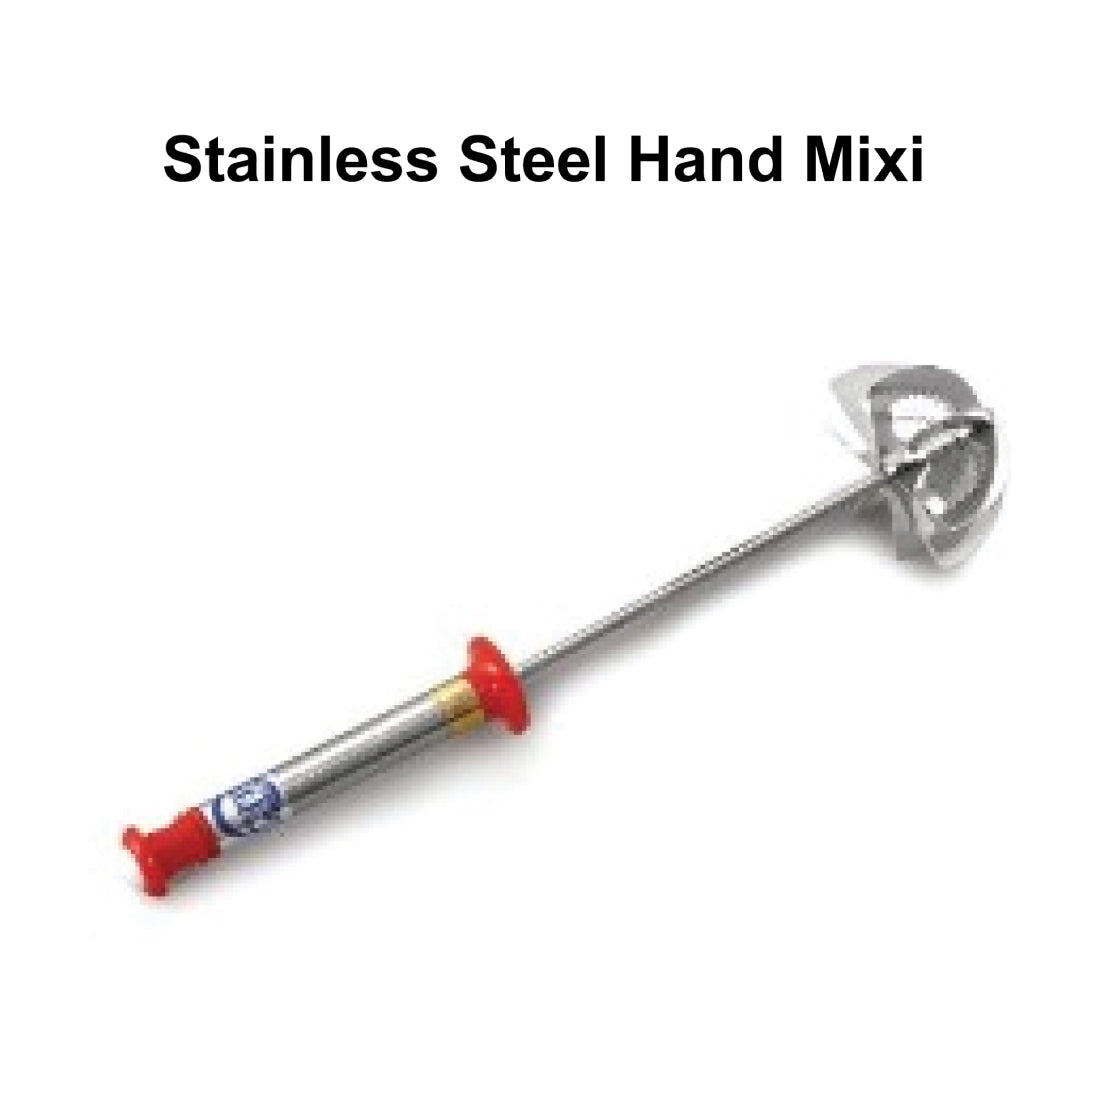 Stainless Steel Hand Mixi